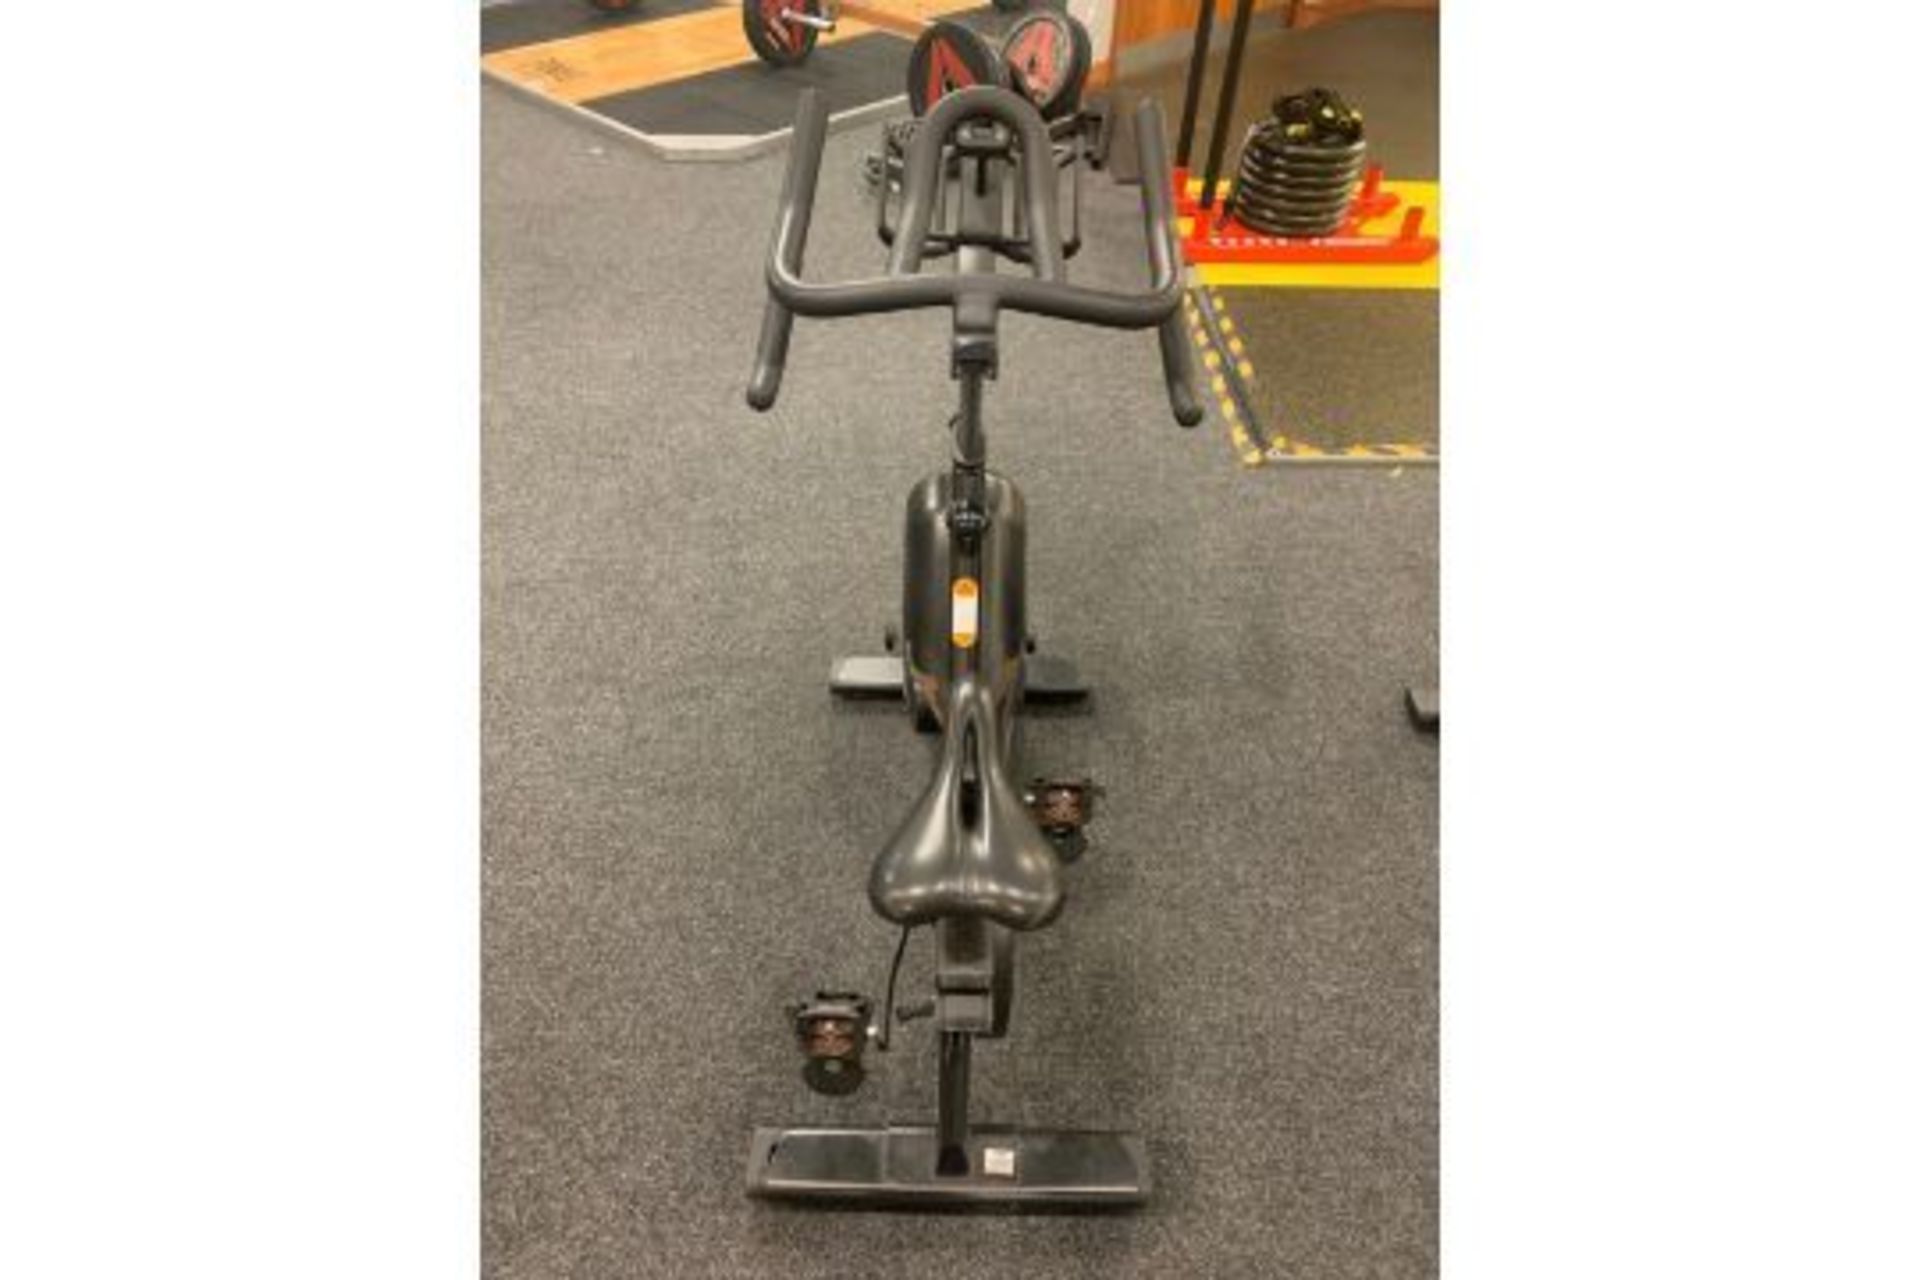 F Series Spin Bike - Image 2 of 4